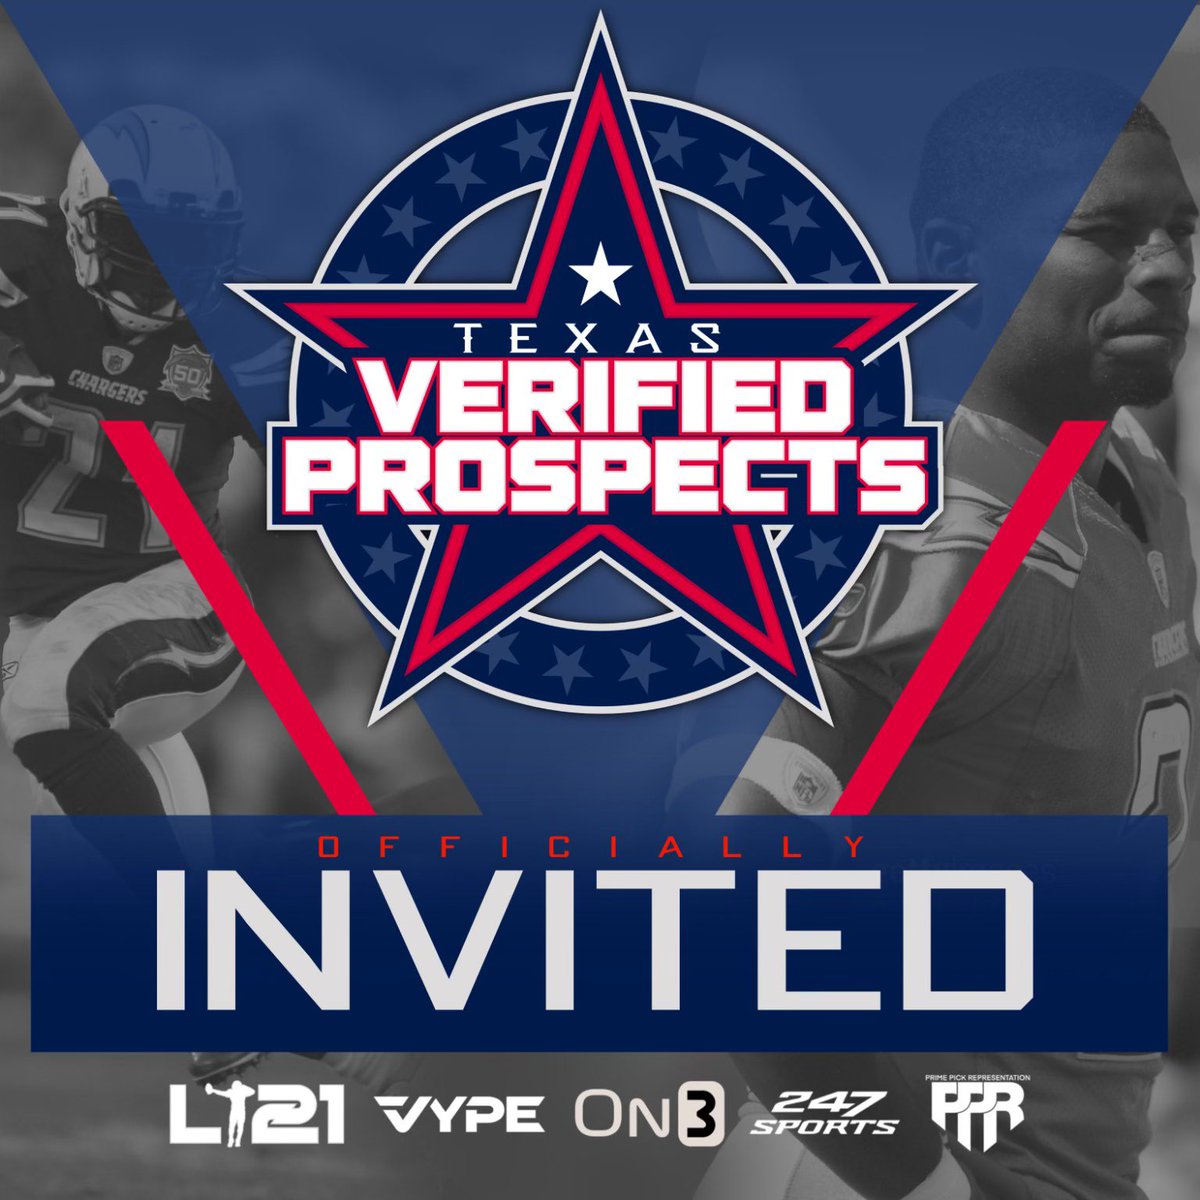 Thank you @TheHoustonHero for the invite, can’t wait to come and ball out!!! @jackson_dipVYPE @LT_21Sports